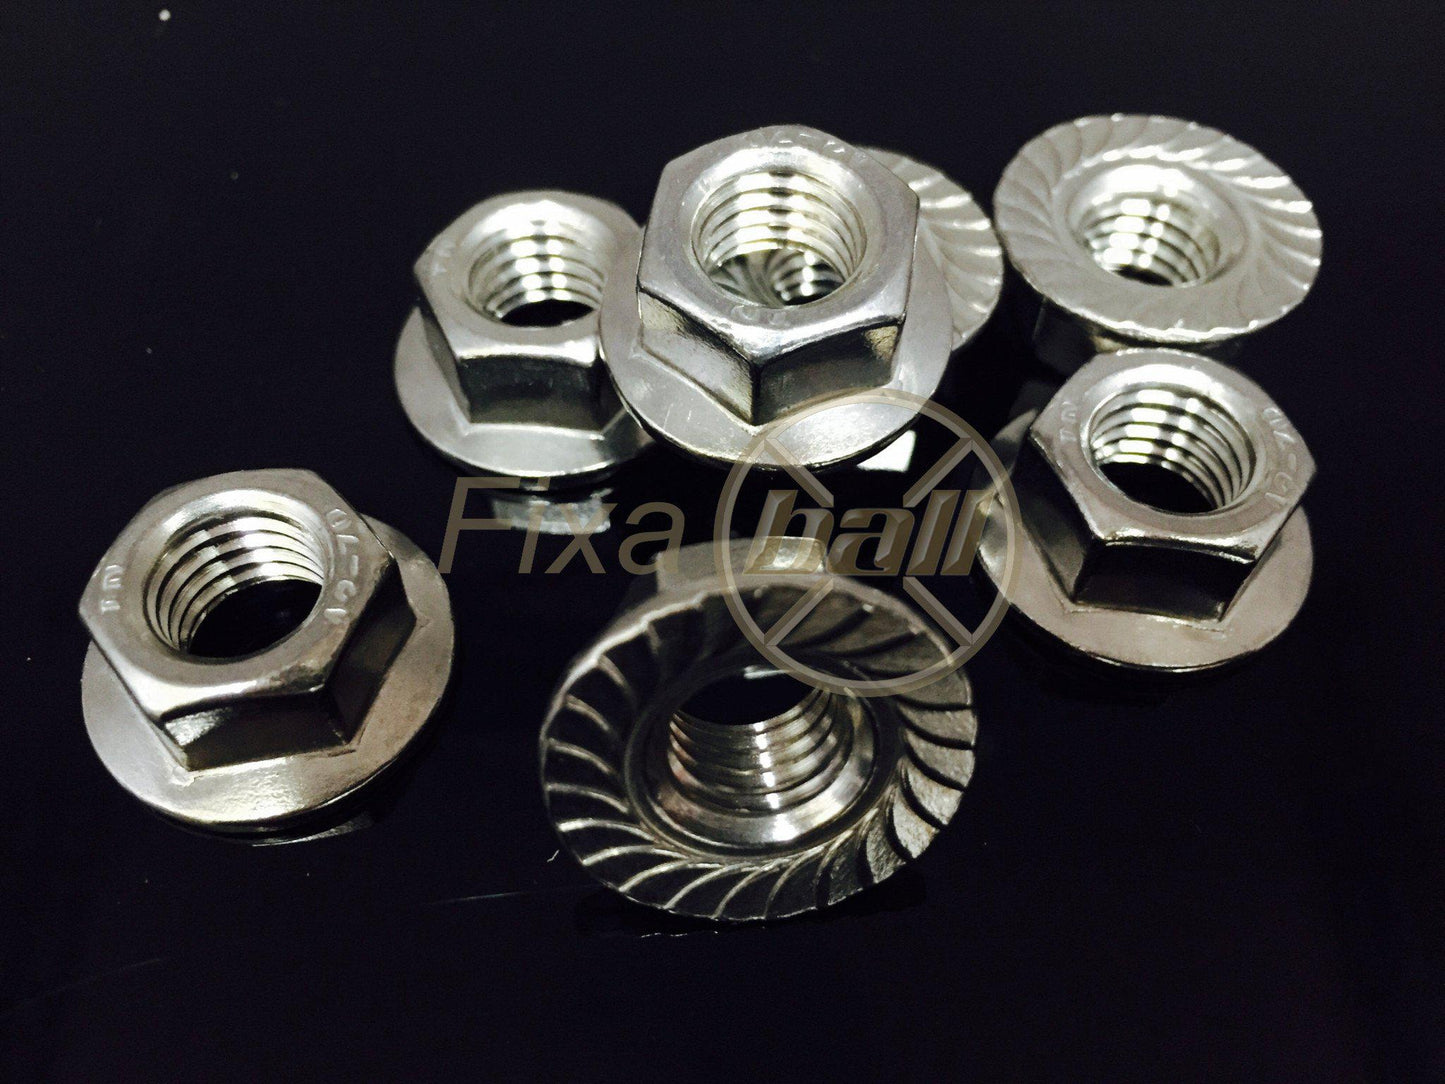 M3 - M16, Hex Nut Serrated Flange, A2/ 304 Stainless Steel, DIN 6923. Nuts M3 - M16, Hex Nut Serrated Flange, A2/ 304 Stainless Steel, DIN 6923. Serrated Flange Nuts